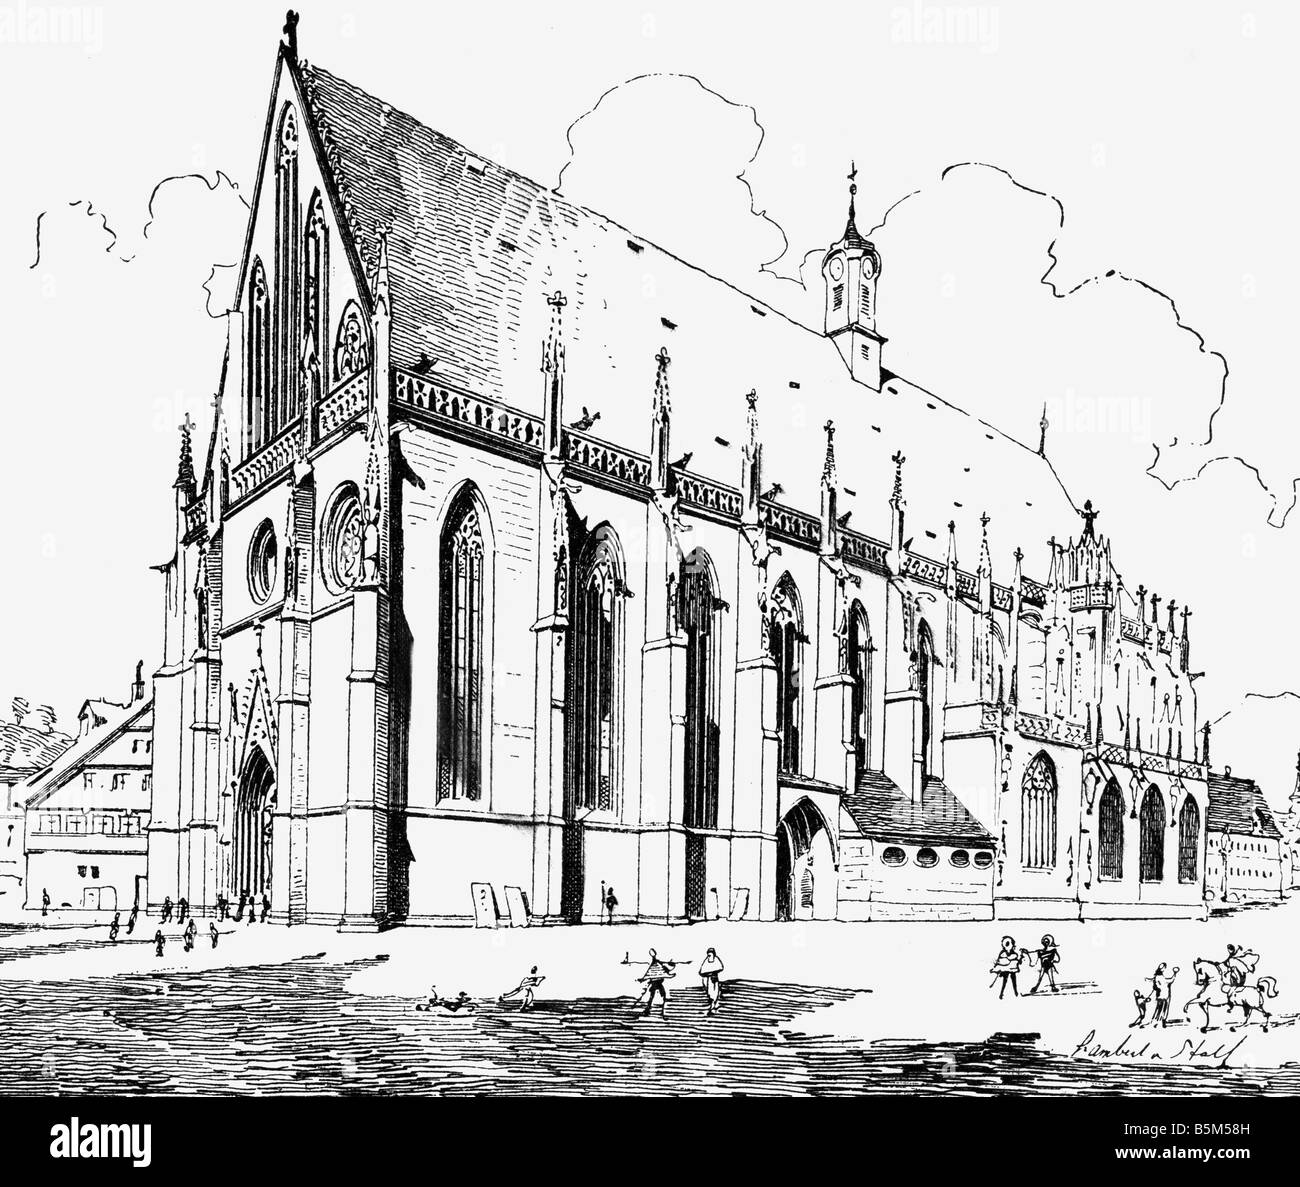 geography / travel, Germany, Schwaebisch Gmuend, Holy Cross Church, exterior view, drawing, 19th century, architecture, catholic church, religion, christianity, historic, historical, Baden-Wurttemberg, Baden-Wuerttemberg, Schwabisch Gmund, Wuerttemberg, Wurttemberg, Württemberg, Schwäbisch Gmünd, people, Stock Photo